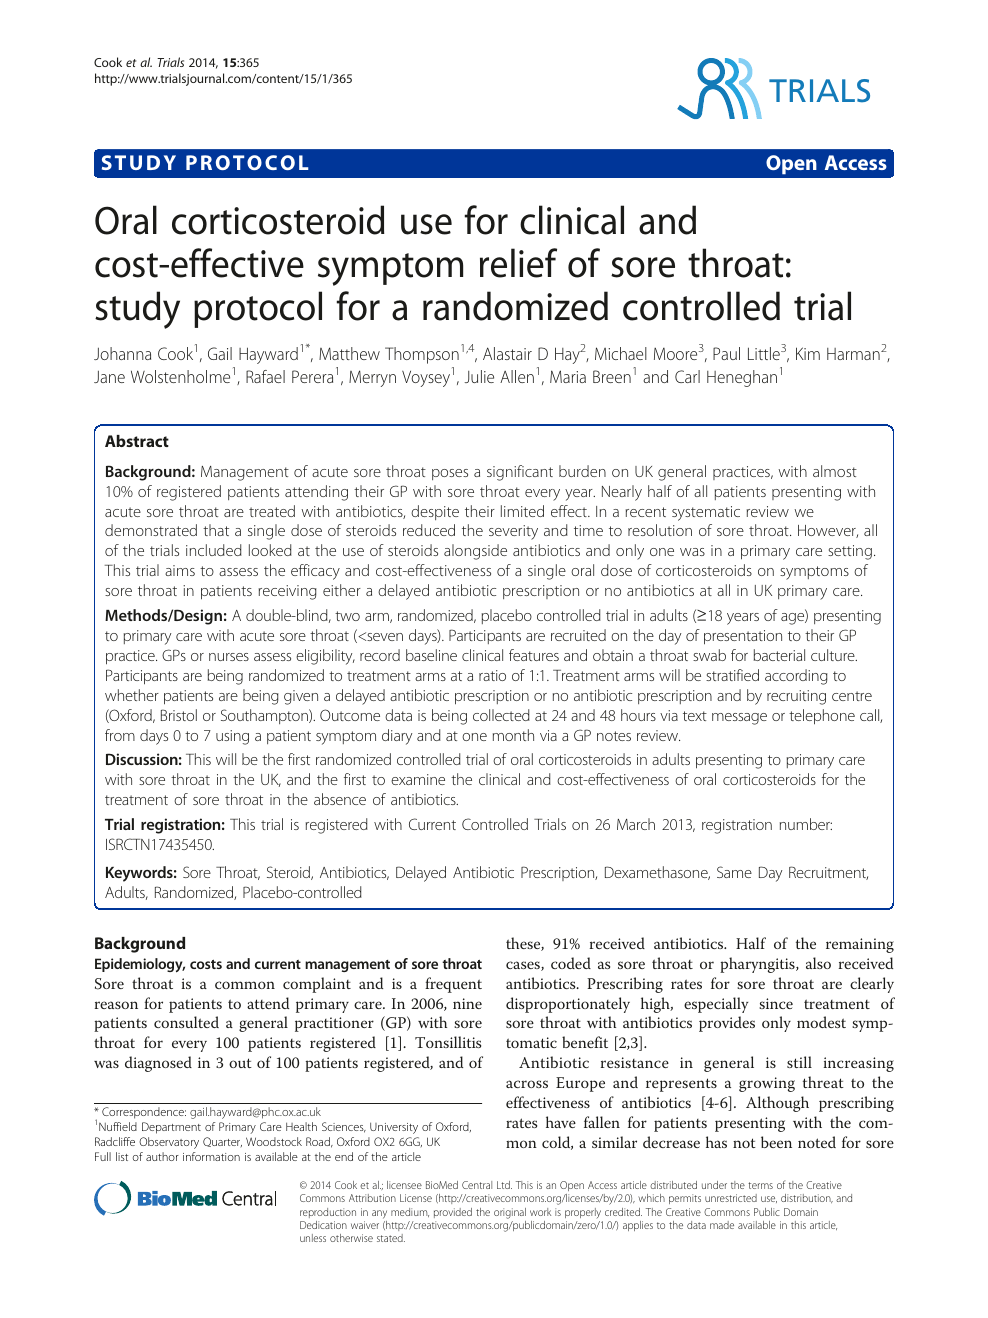 Effectiveness of corticosteroids in otitis media with effusion: an